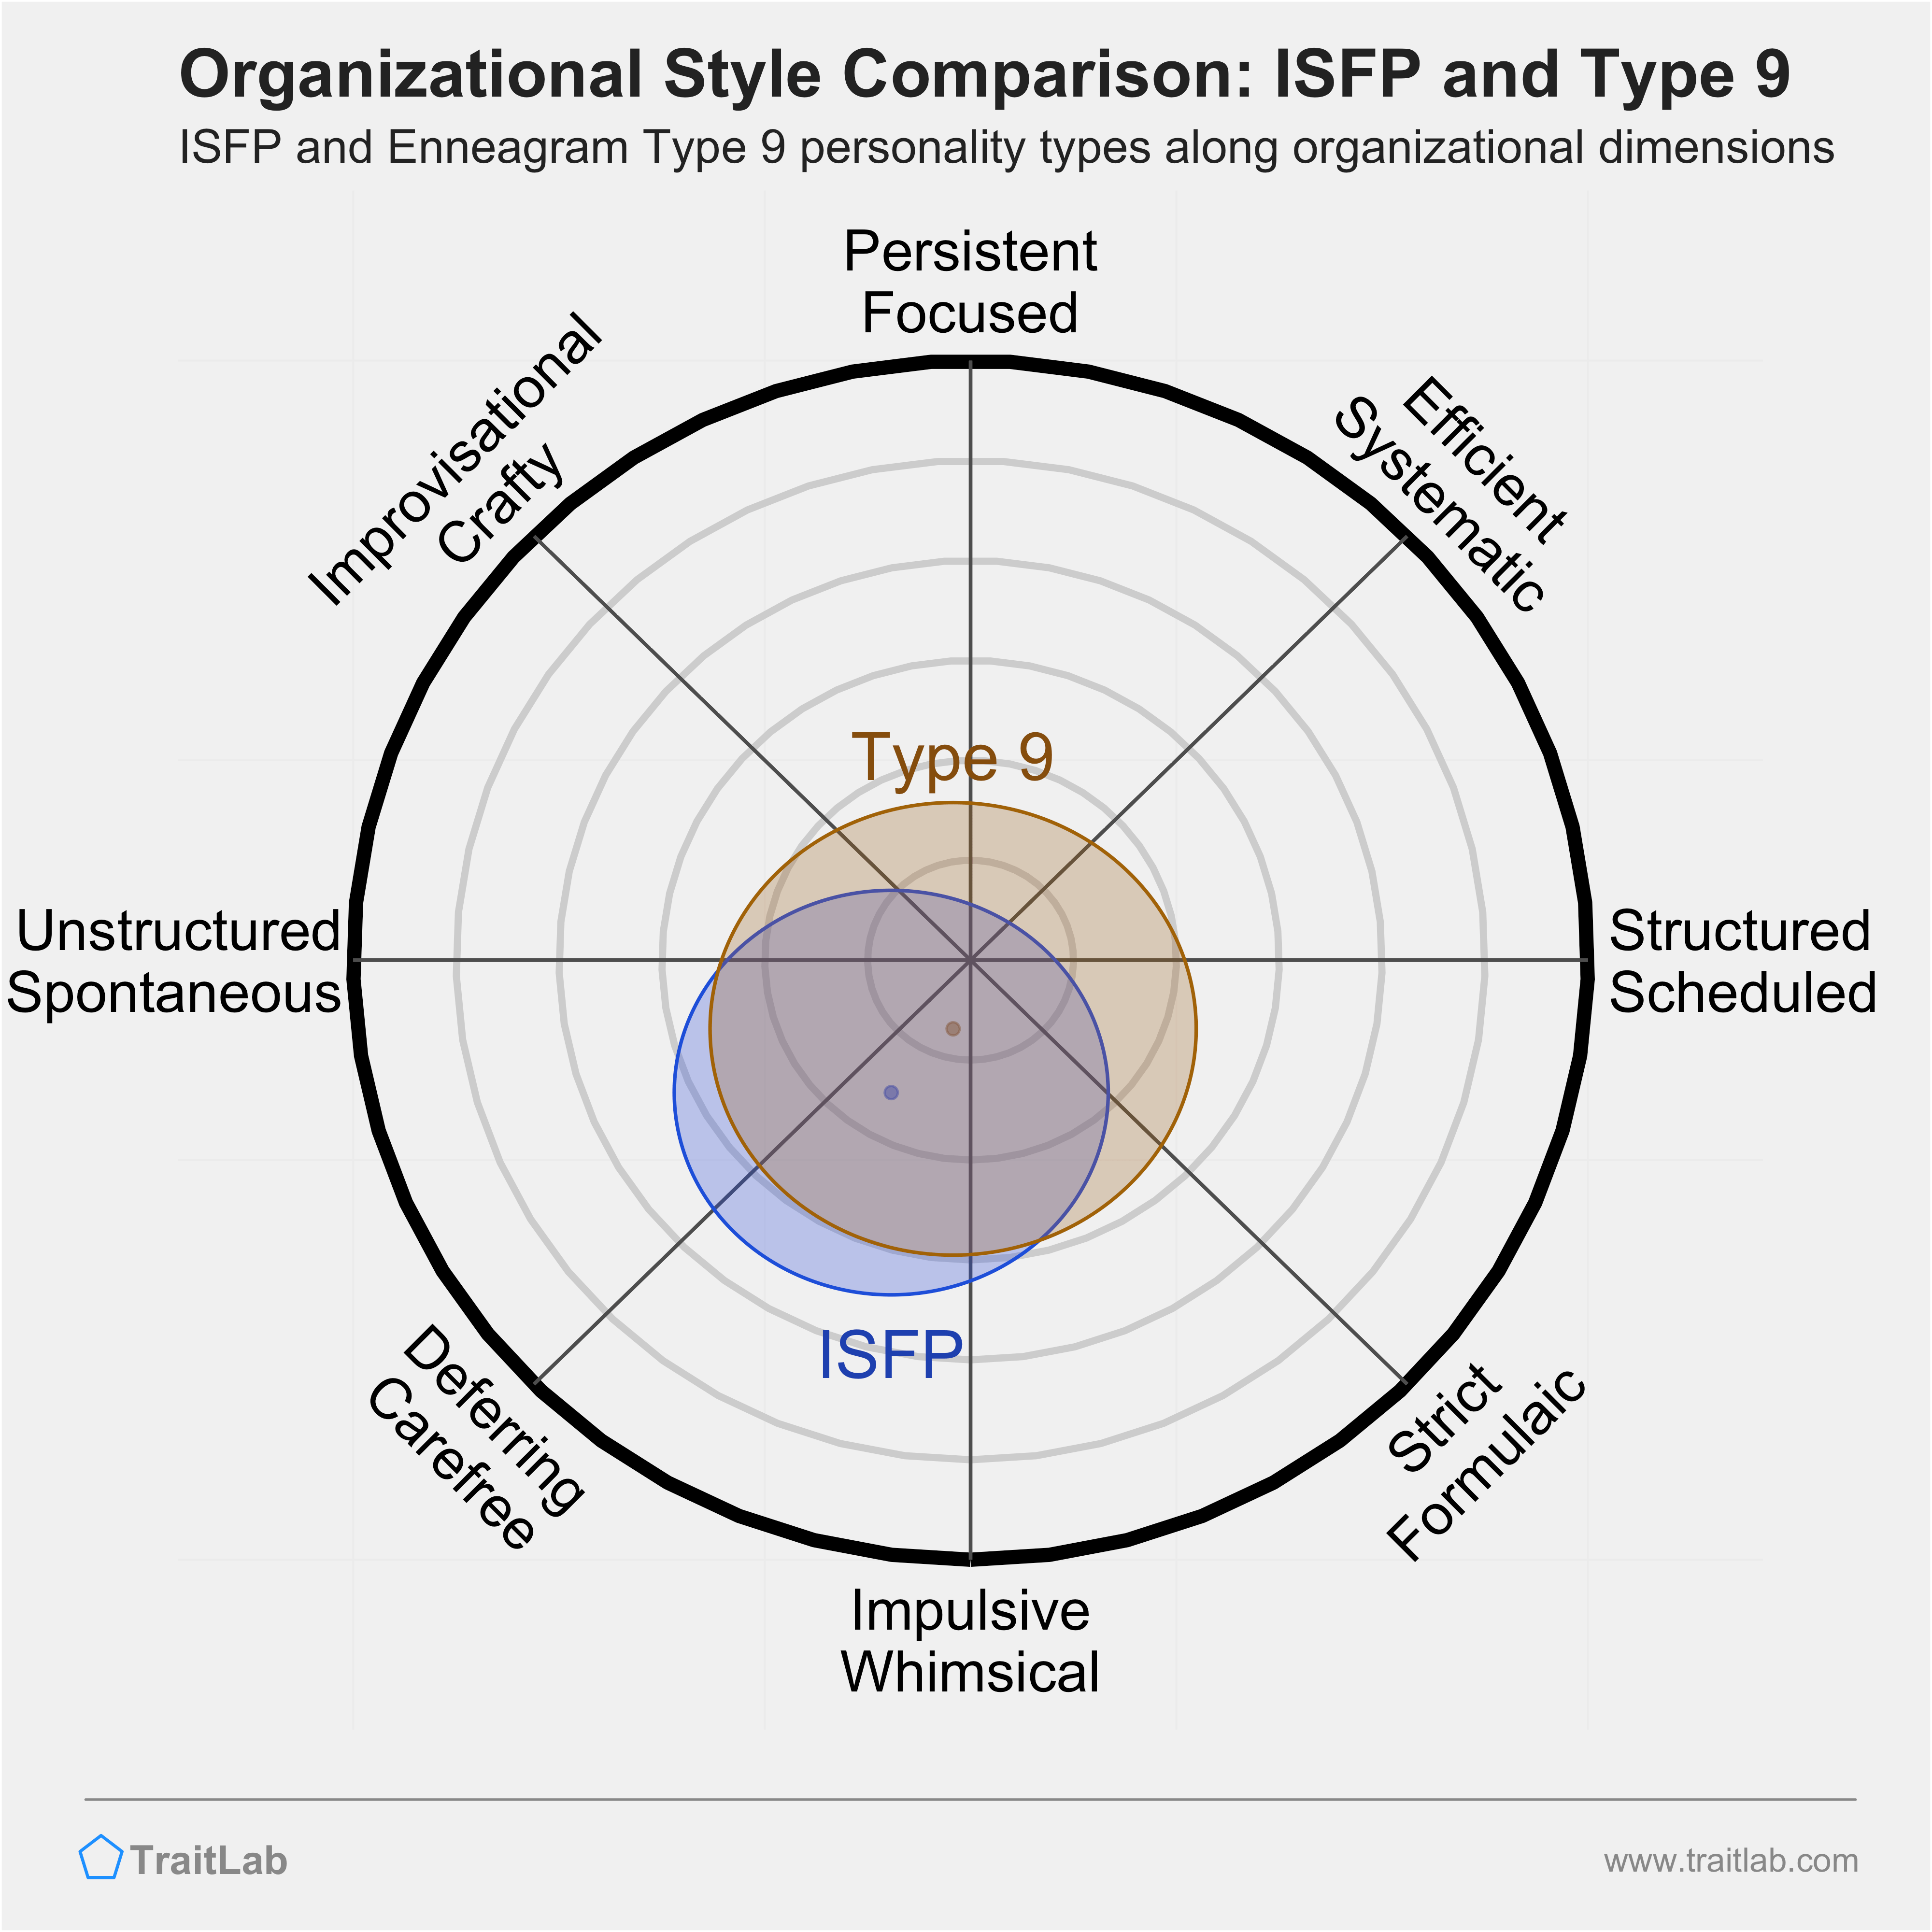 ISFP and Type 9 comparison across organizational dimensions